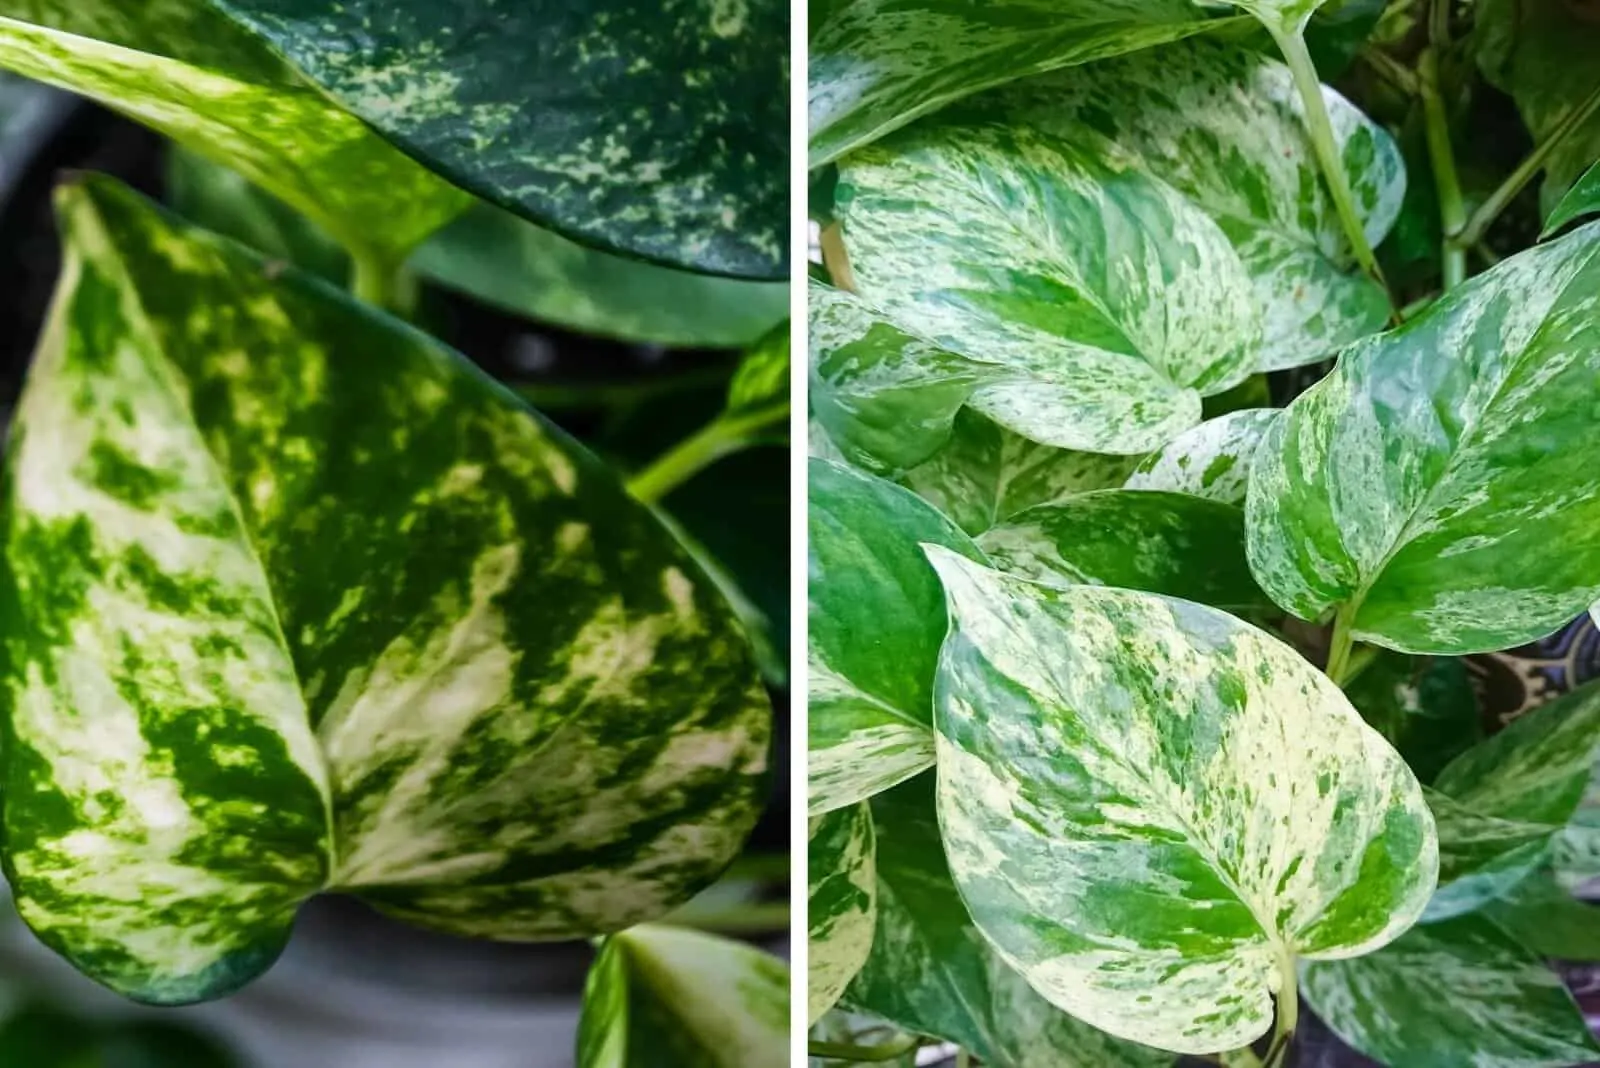 Snow Queen and Marble Queen Pothos leaves